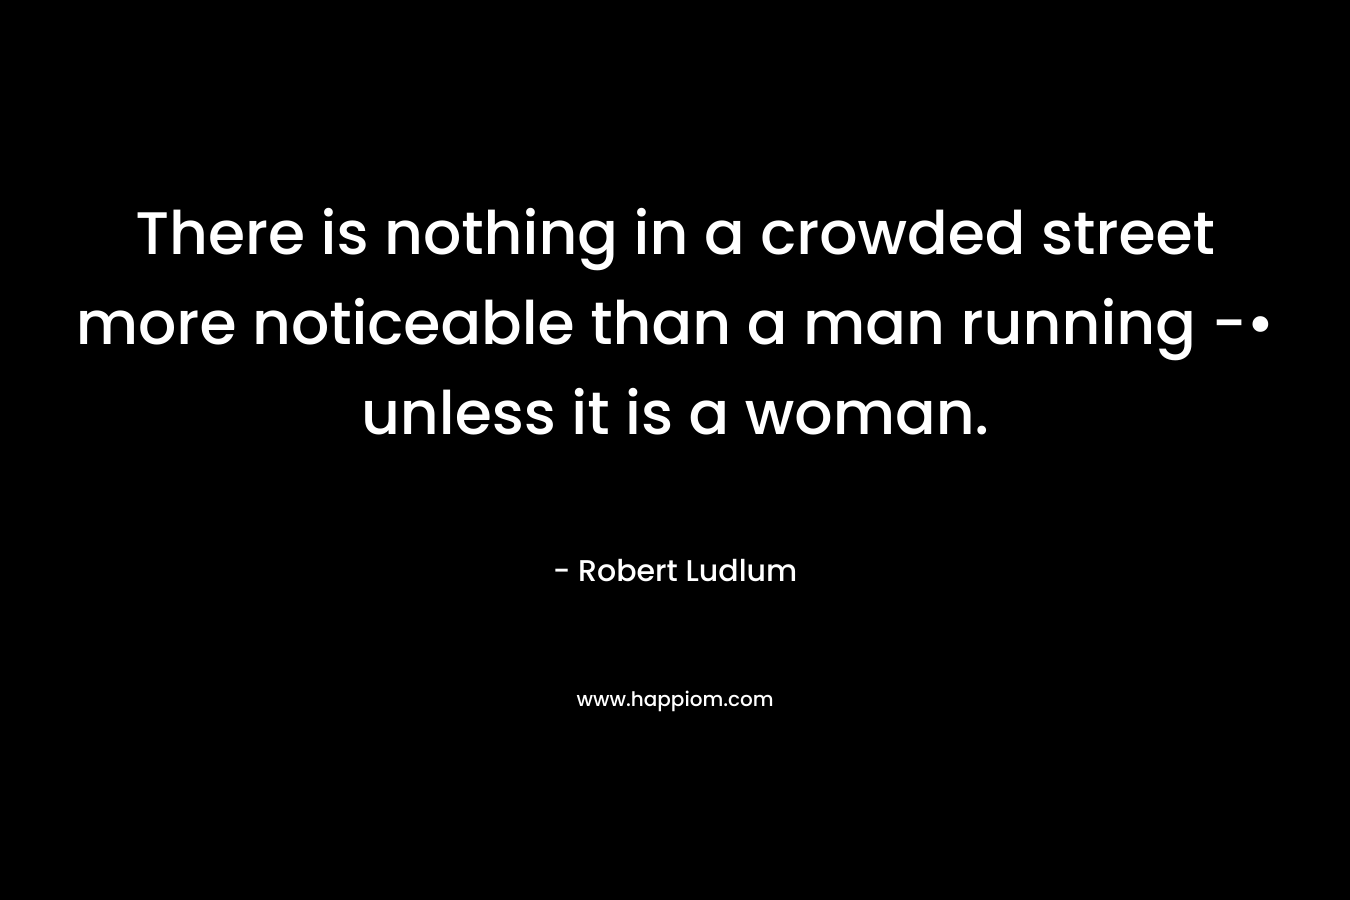 There is nothing in a crowded street more noticeable than a man running -• unless it is a woman. – Robert Ludlum